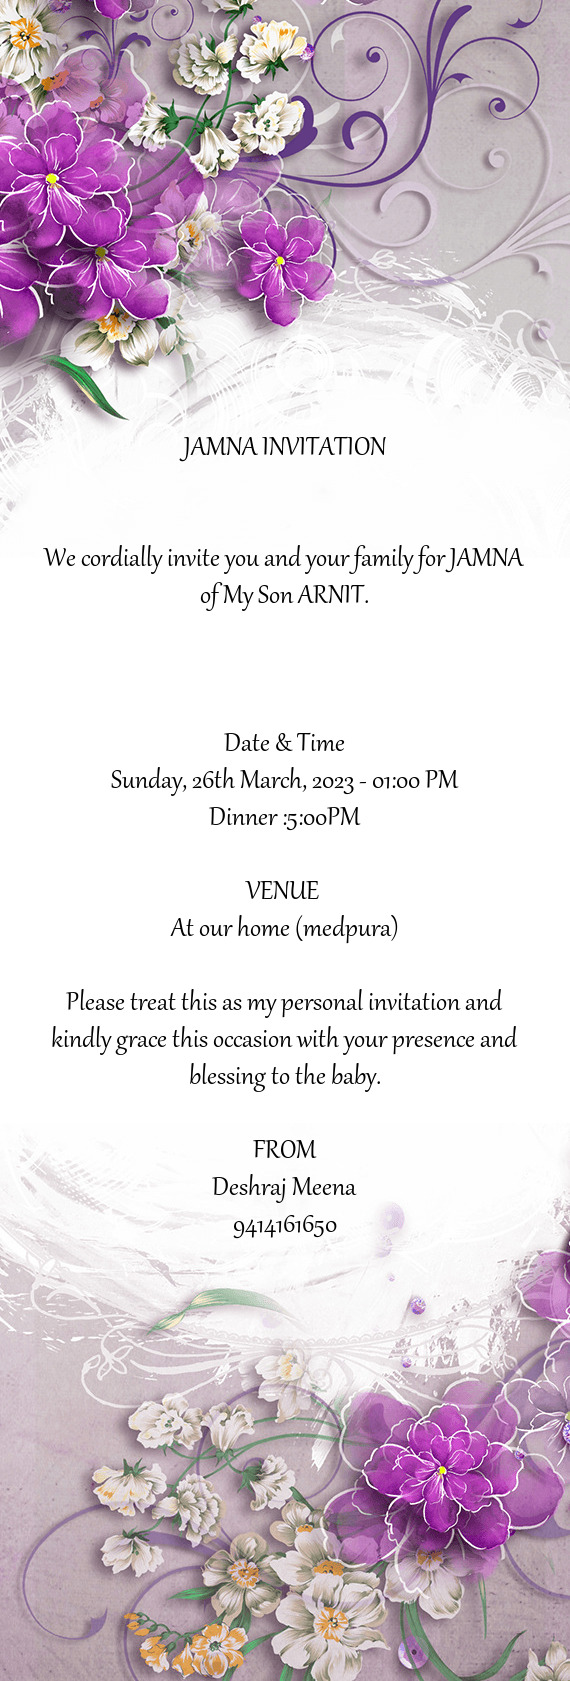 We cordially invite you and your family for JAMNA of My Son ARNIT